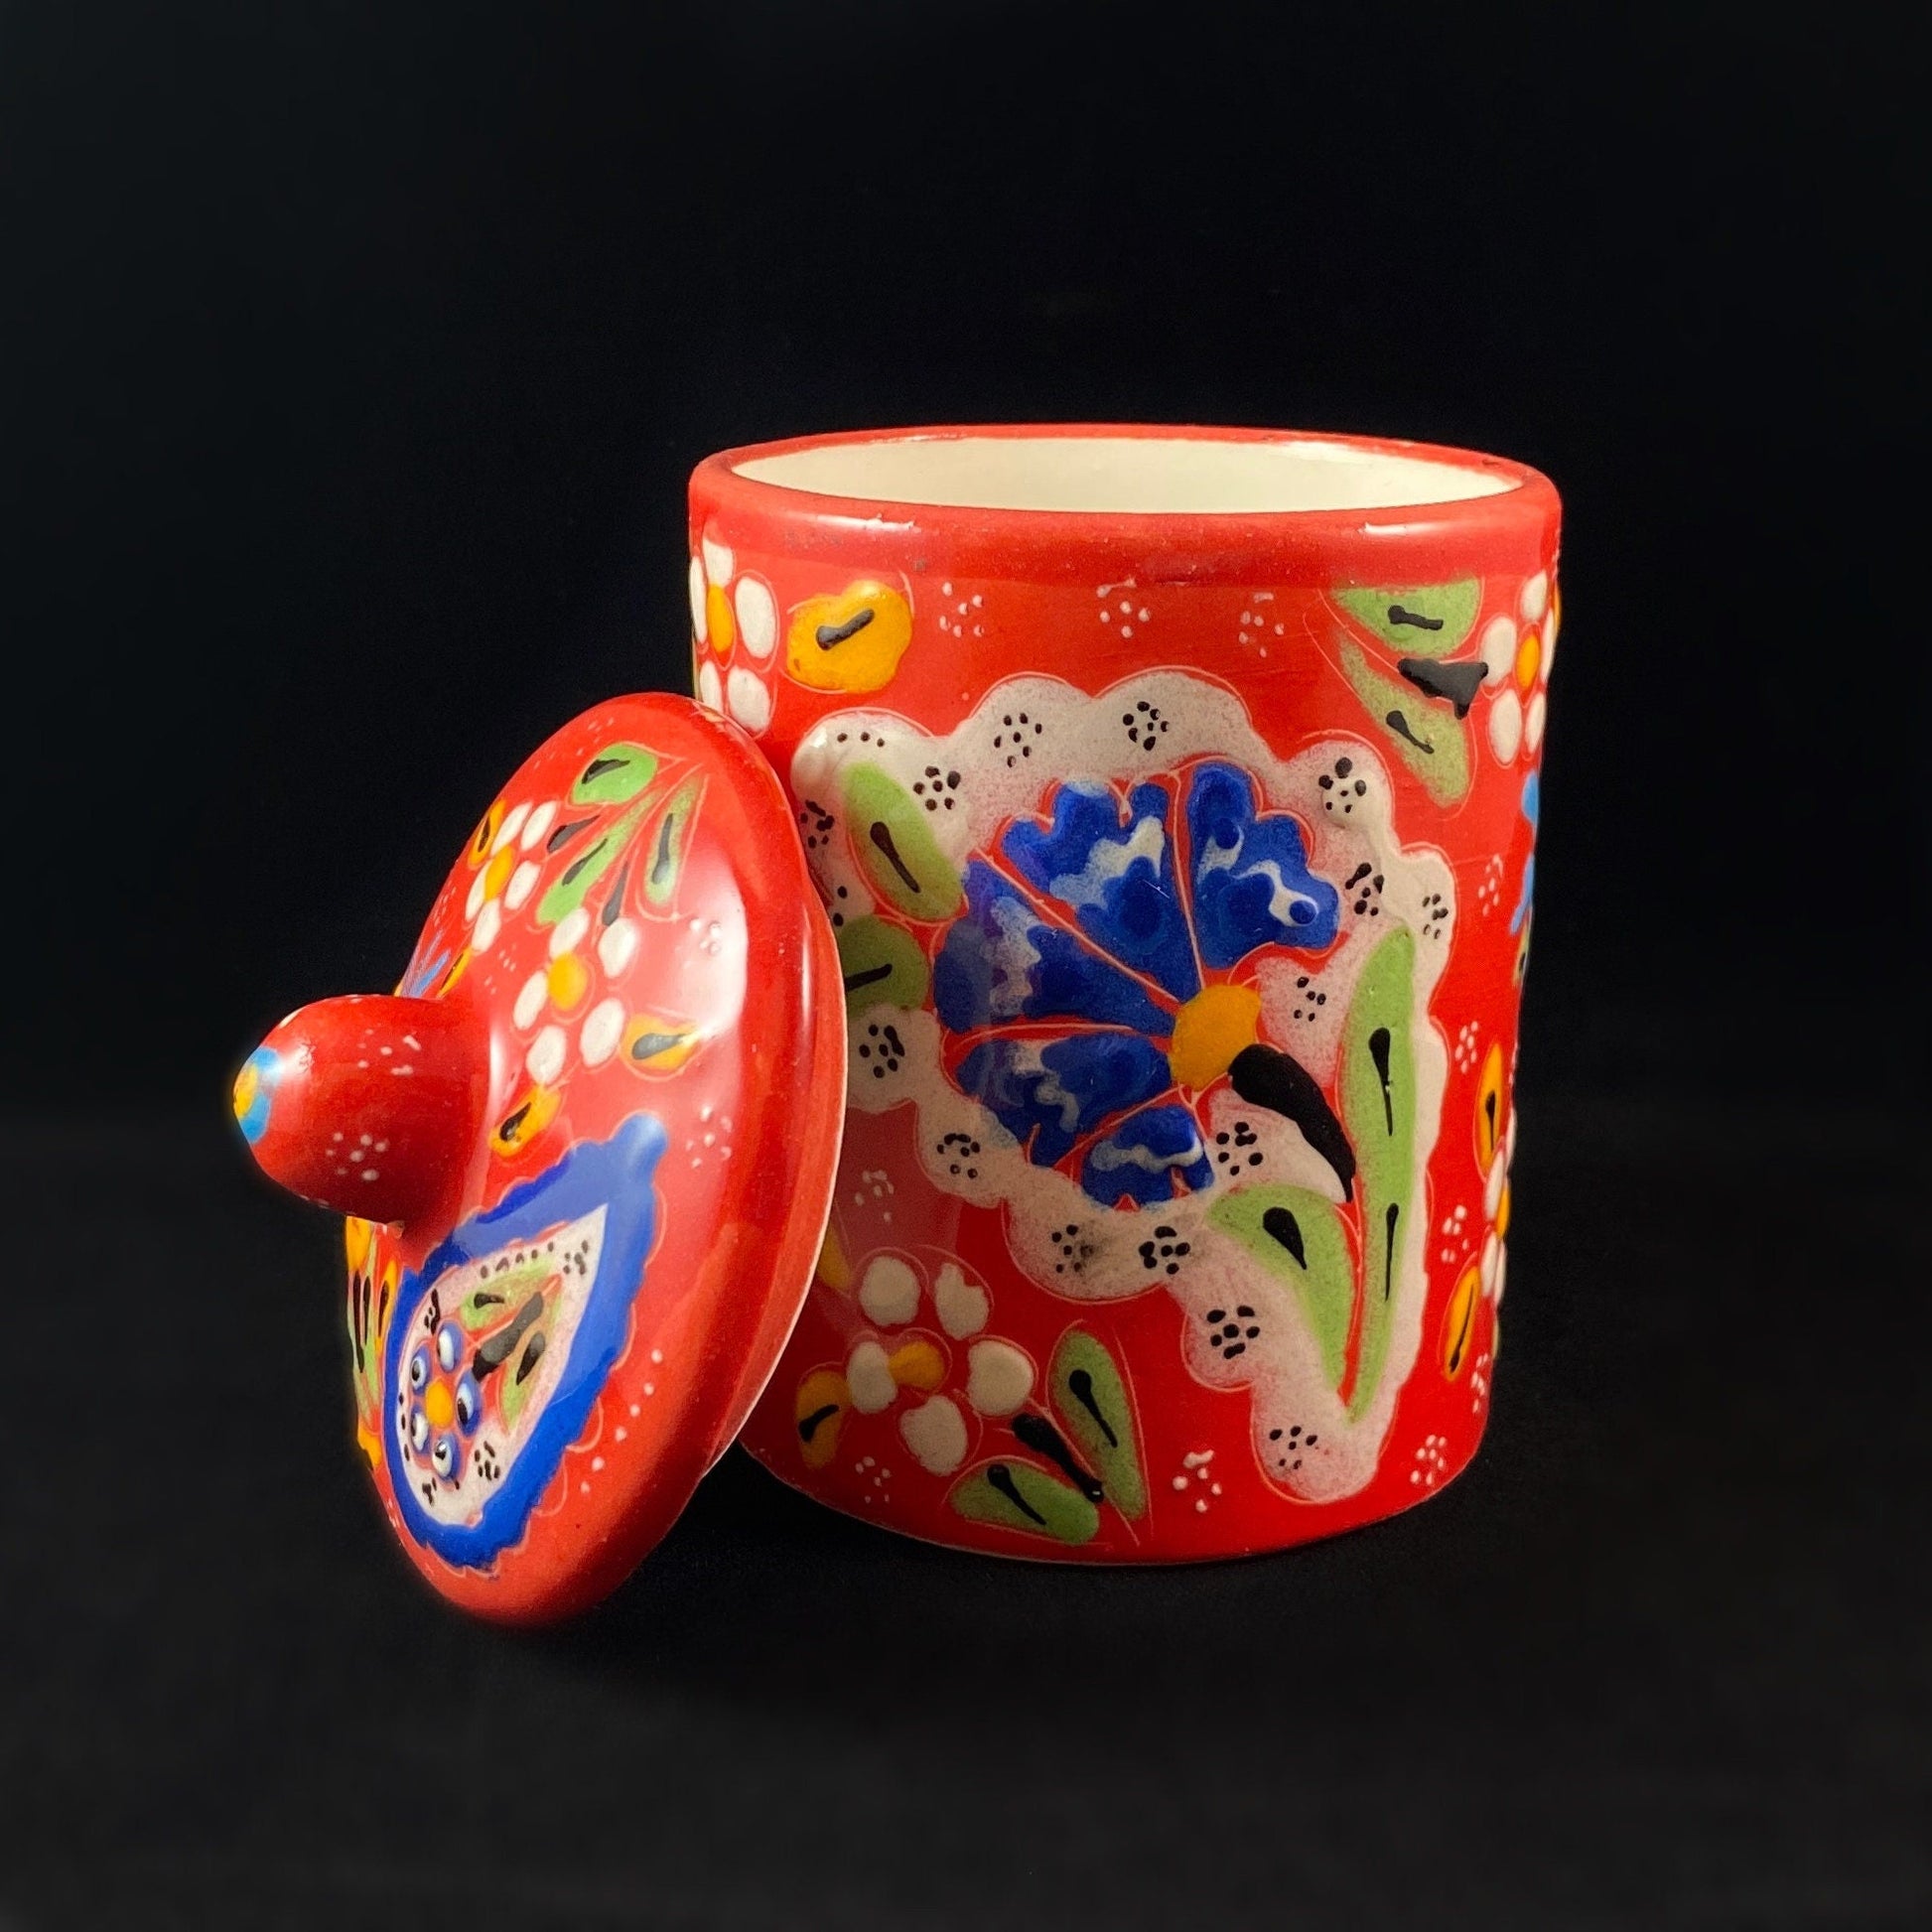 Handmade Canister with Top, Functional and Decorative Turkish Pottery, Cottagecore Style, Red